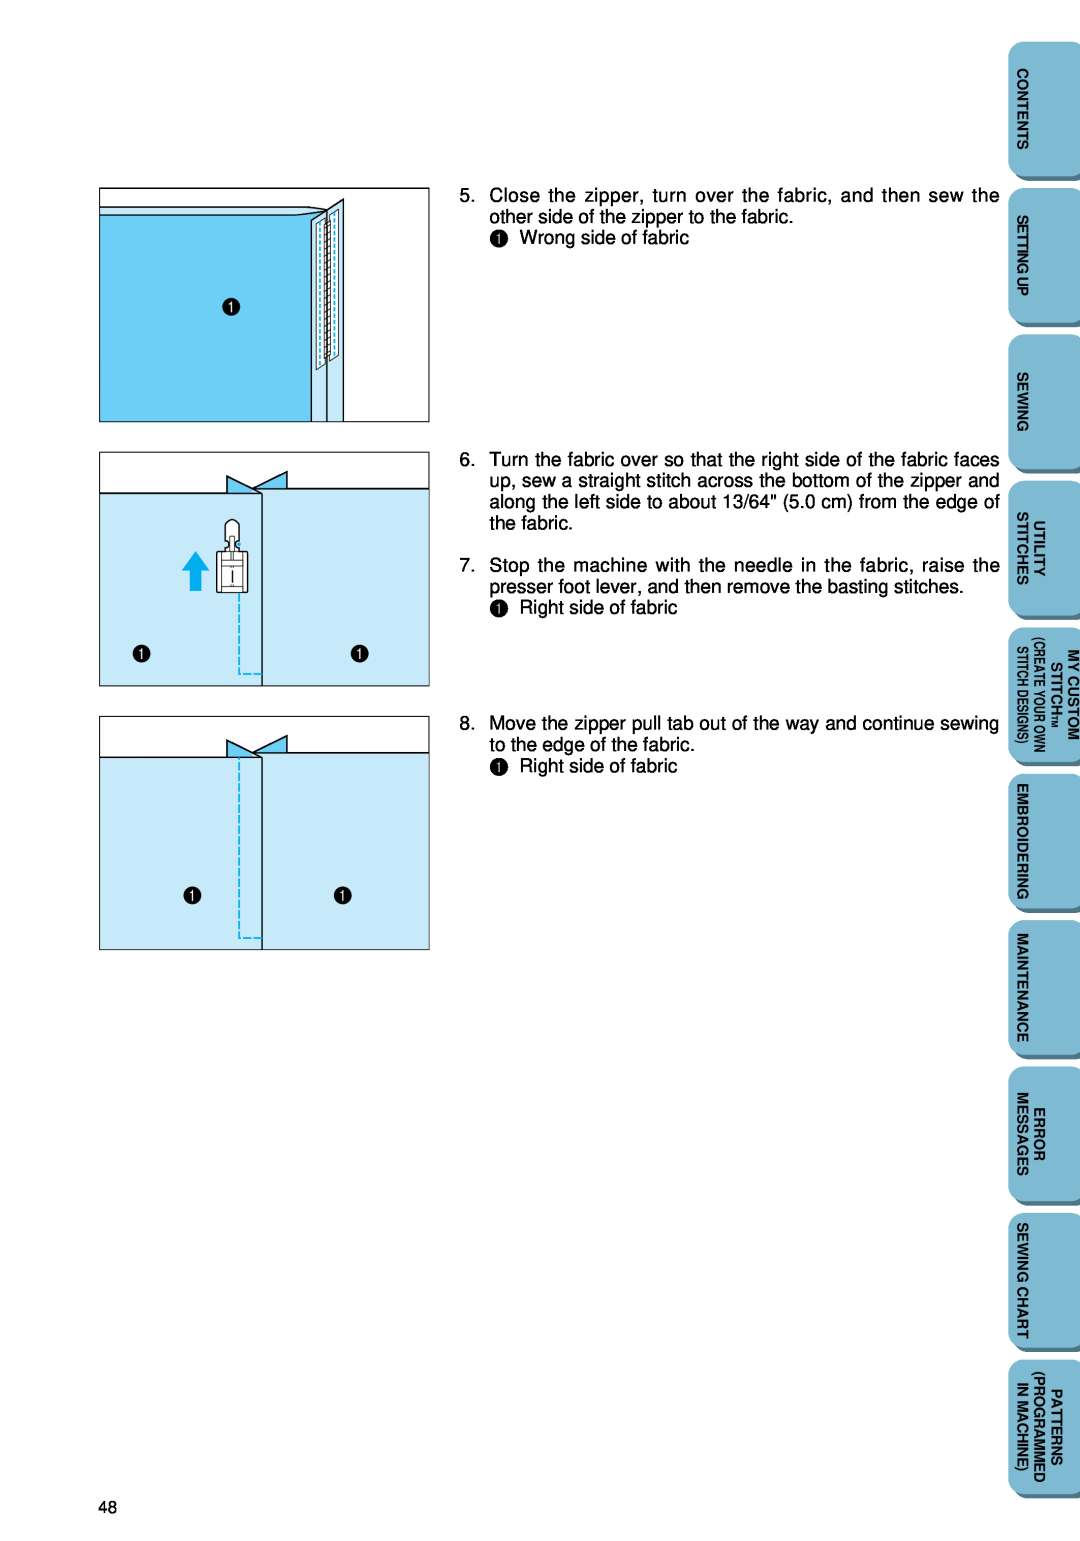 Brother PC 6500 operation manual Close the zipper, turn over the fabric, and then sew the 